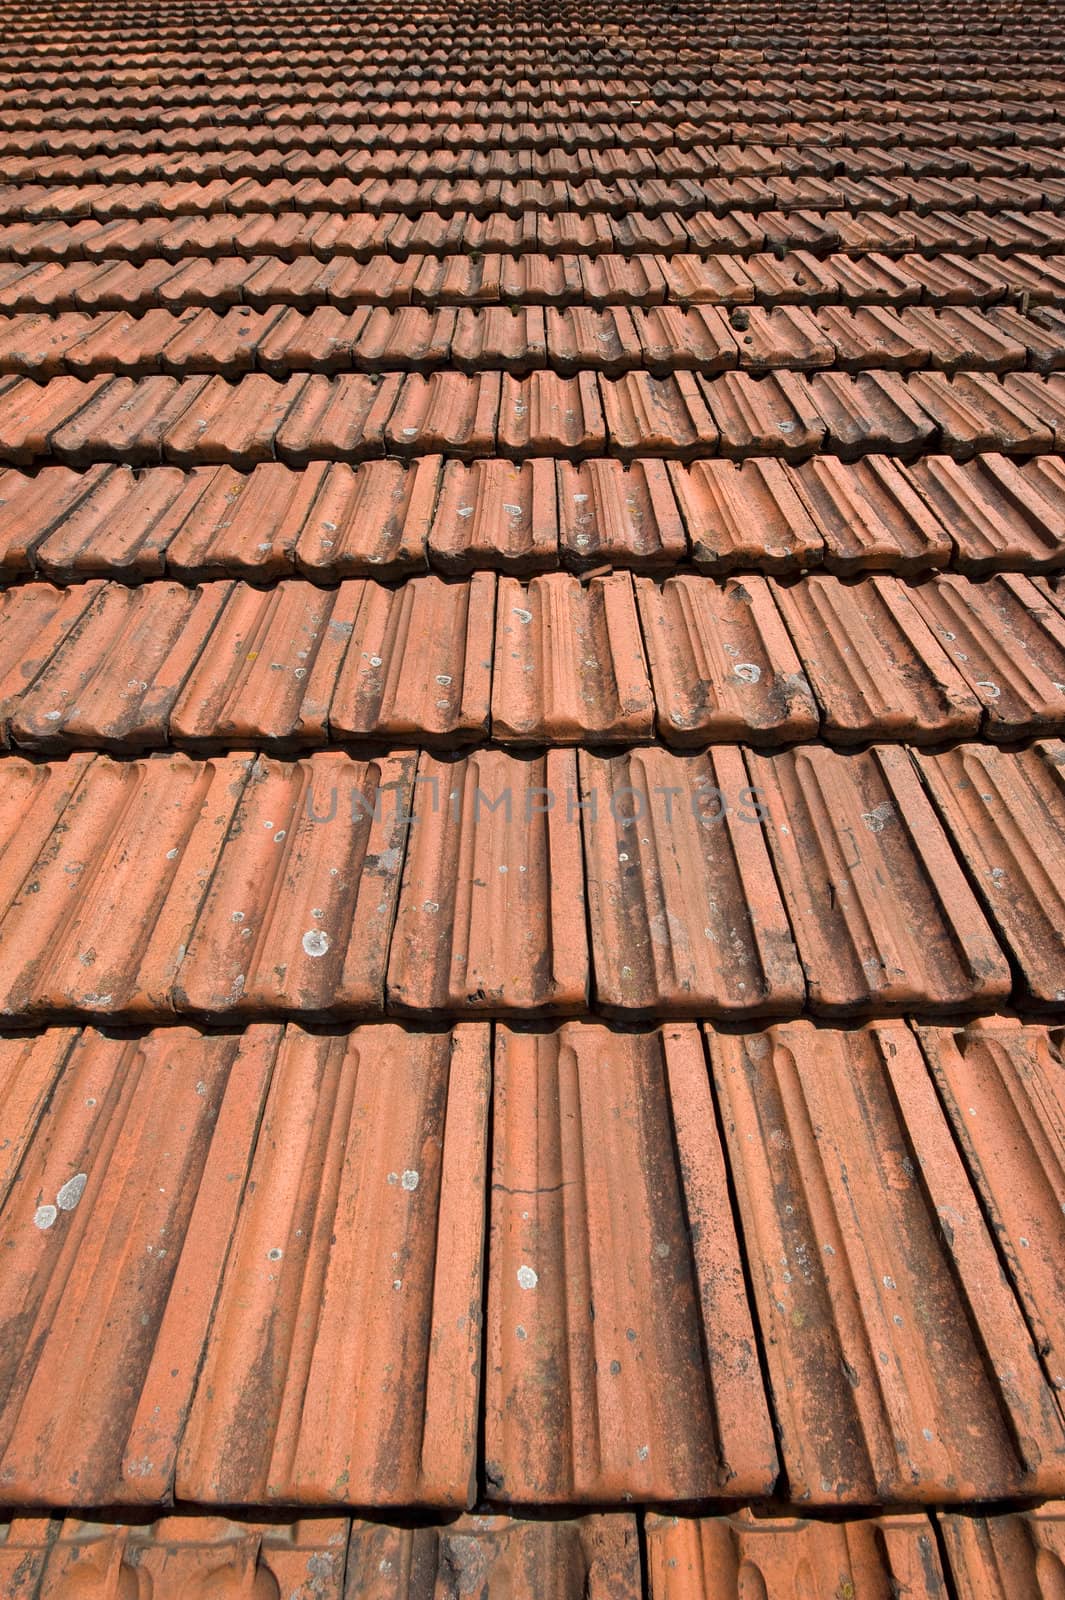 Wide angle shot of a large roof with red tiles by stockbymh